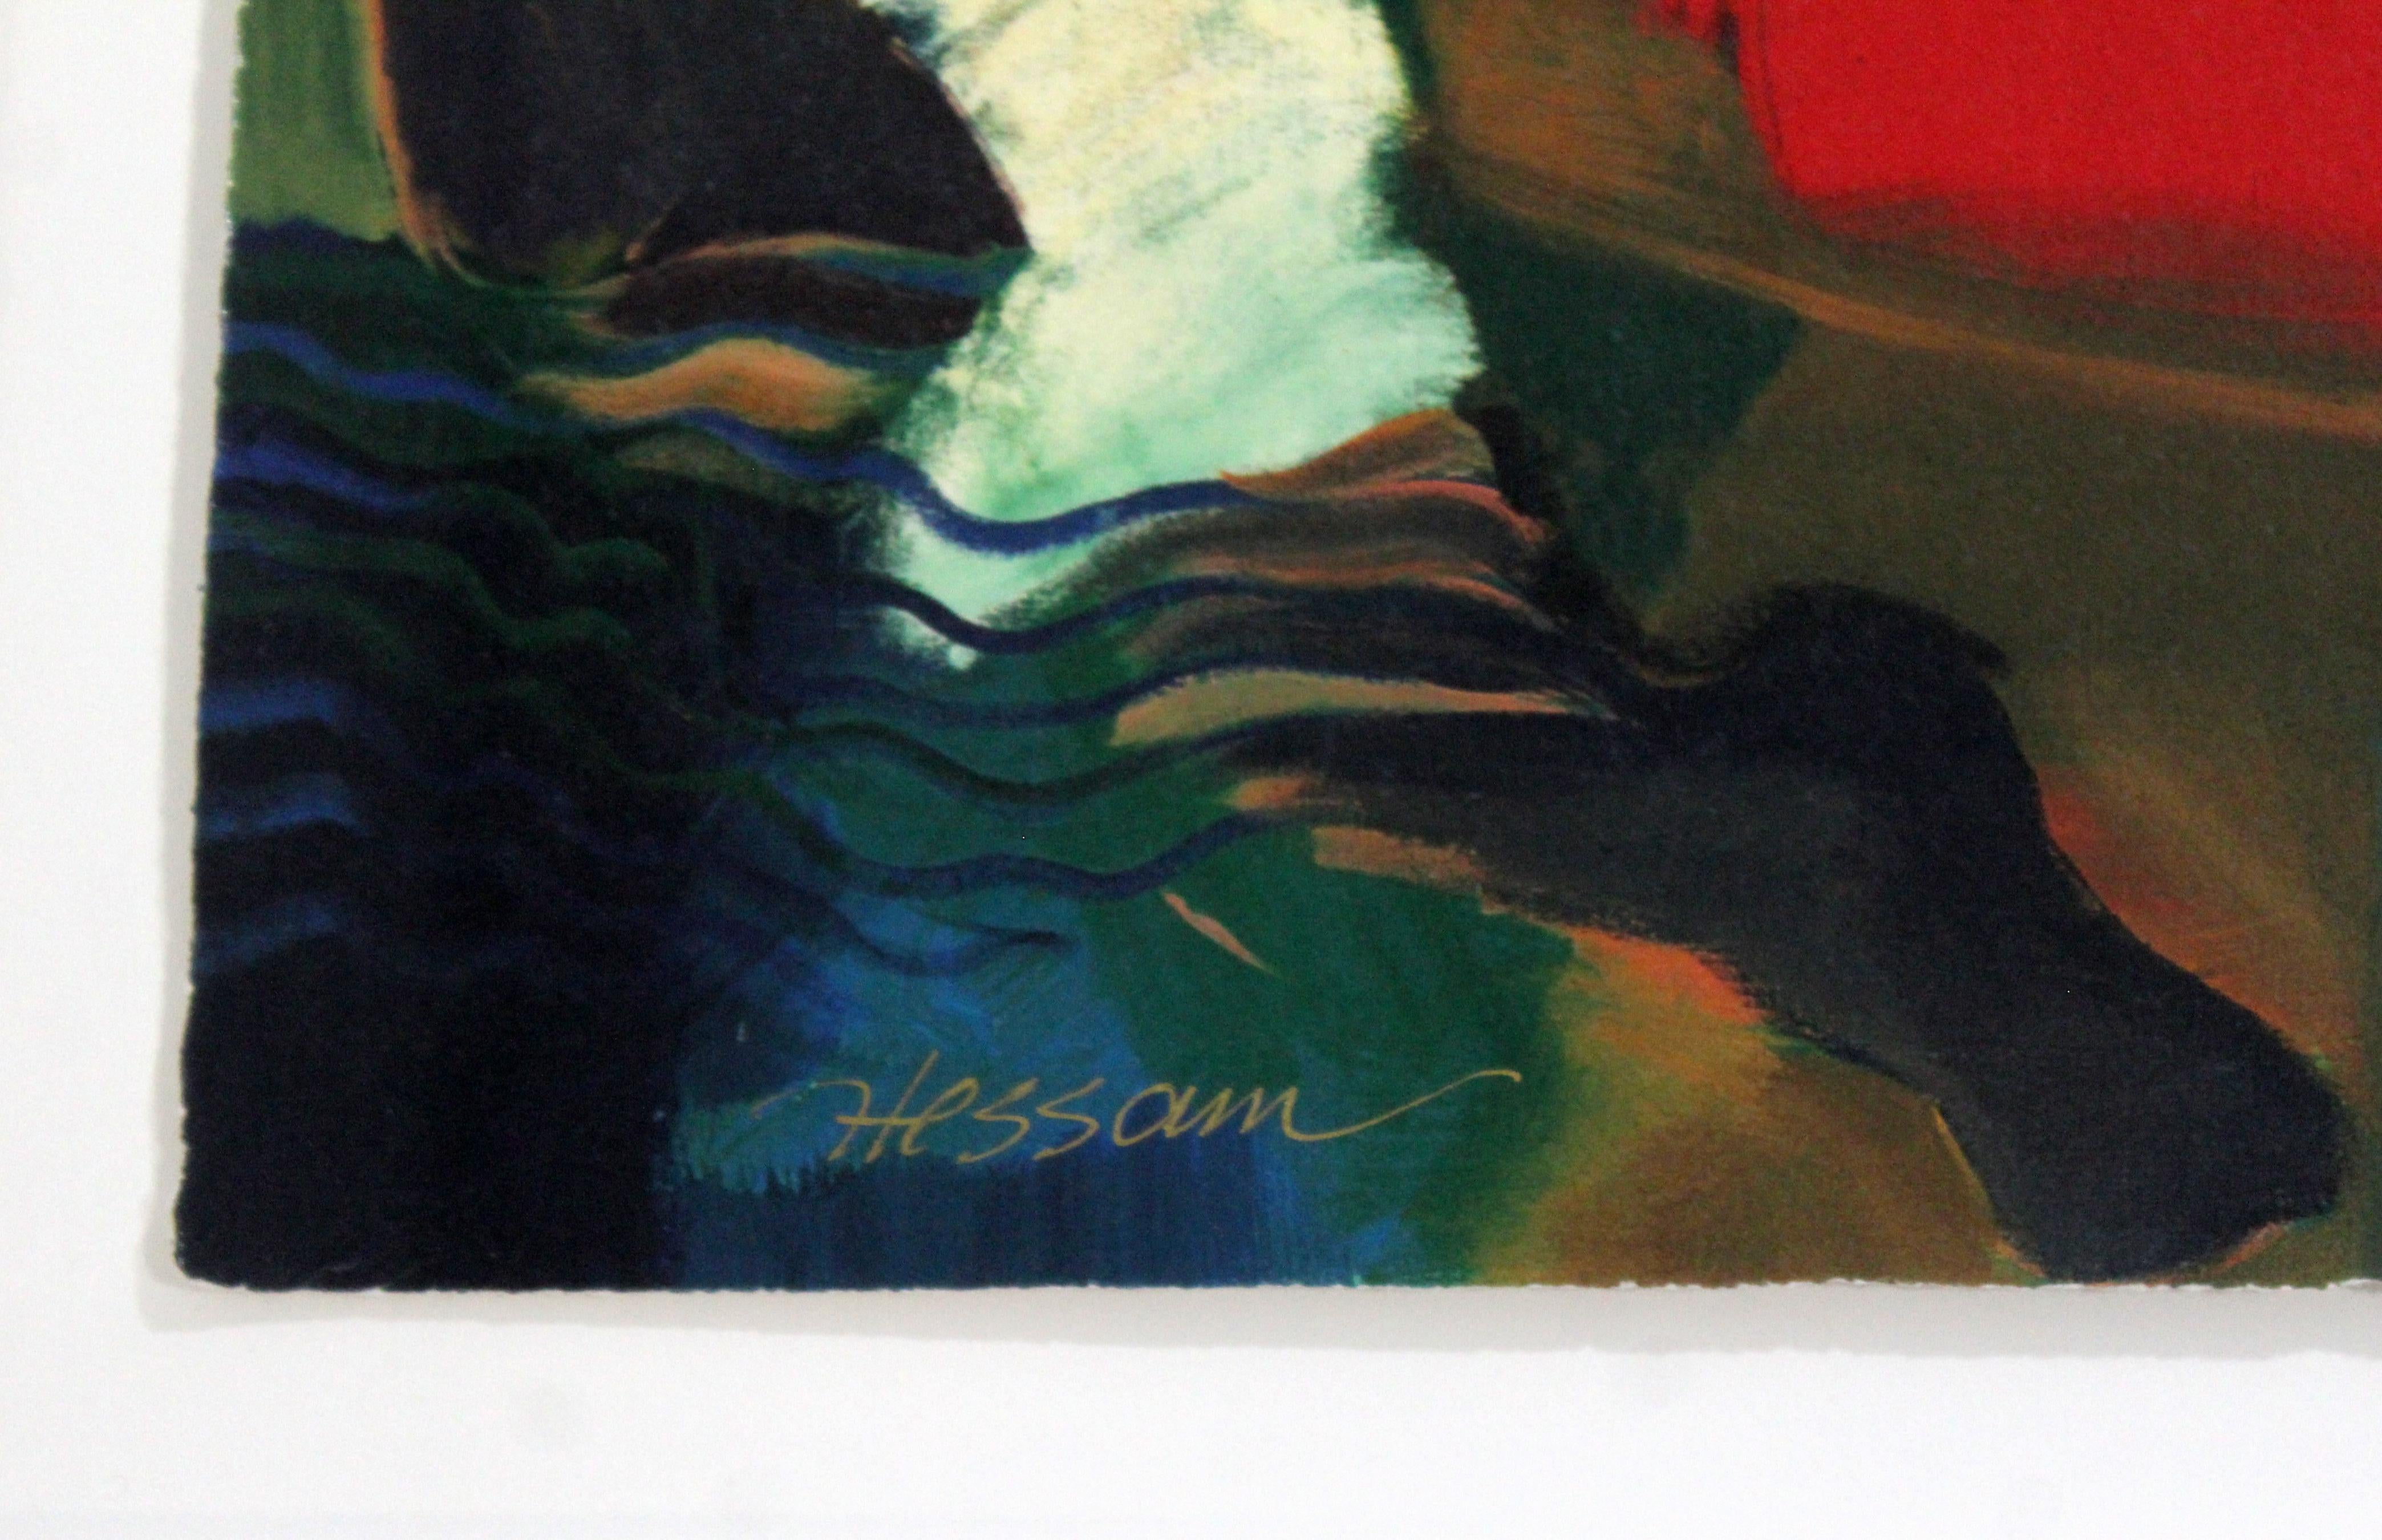 Paint Contemporary Framed Serigraph Signed by Hessam Abrishami Spring Affair 231/395 For Sale